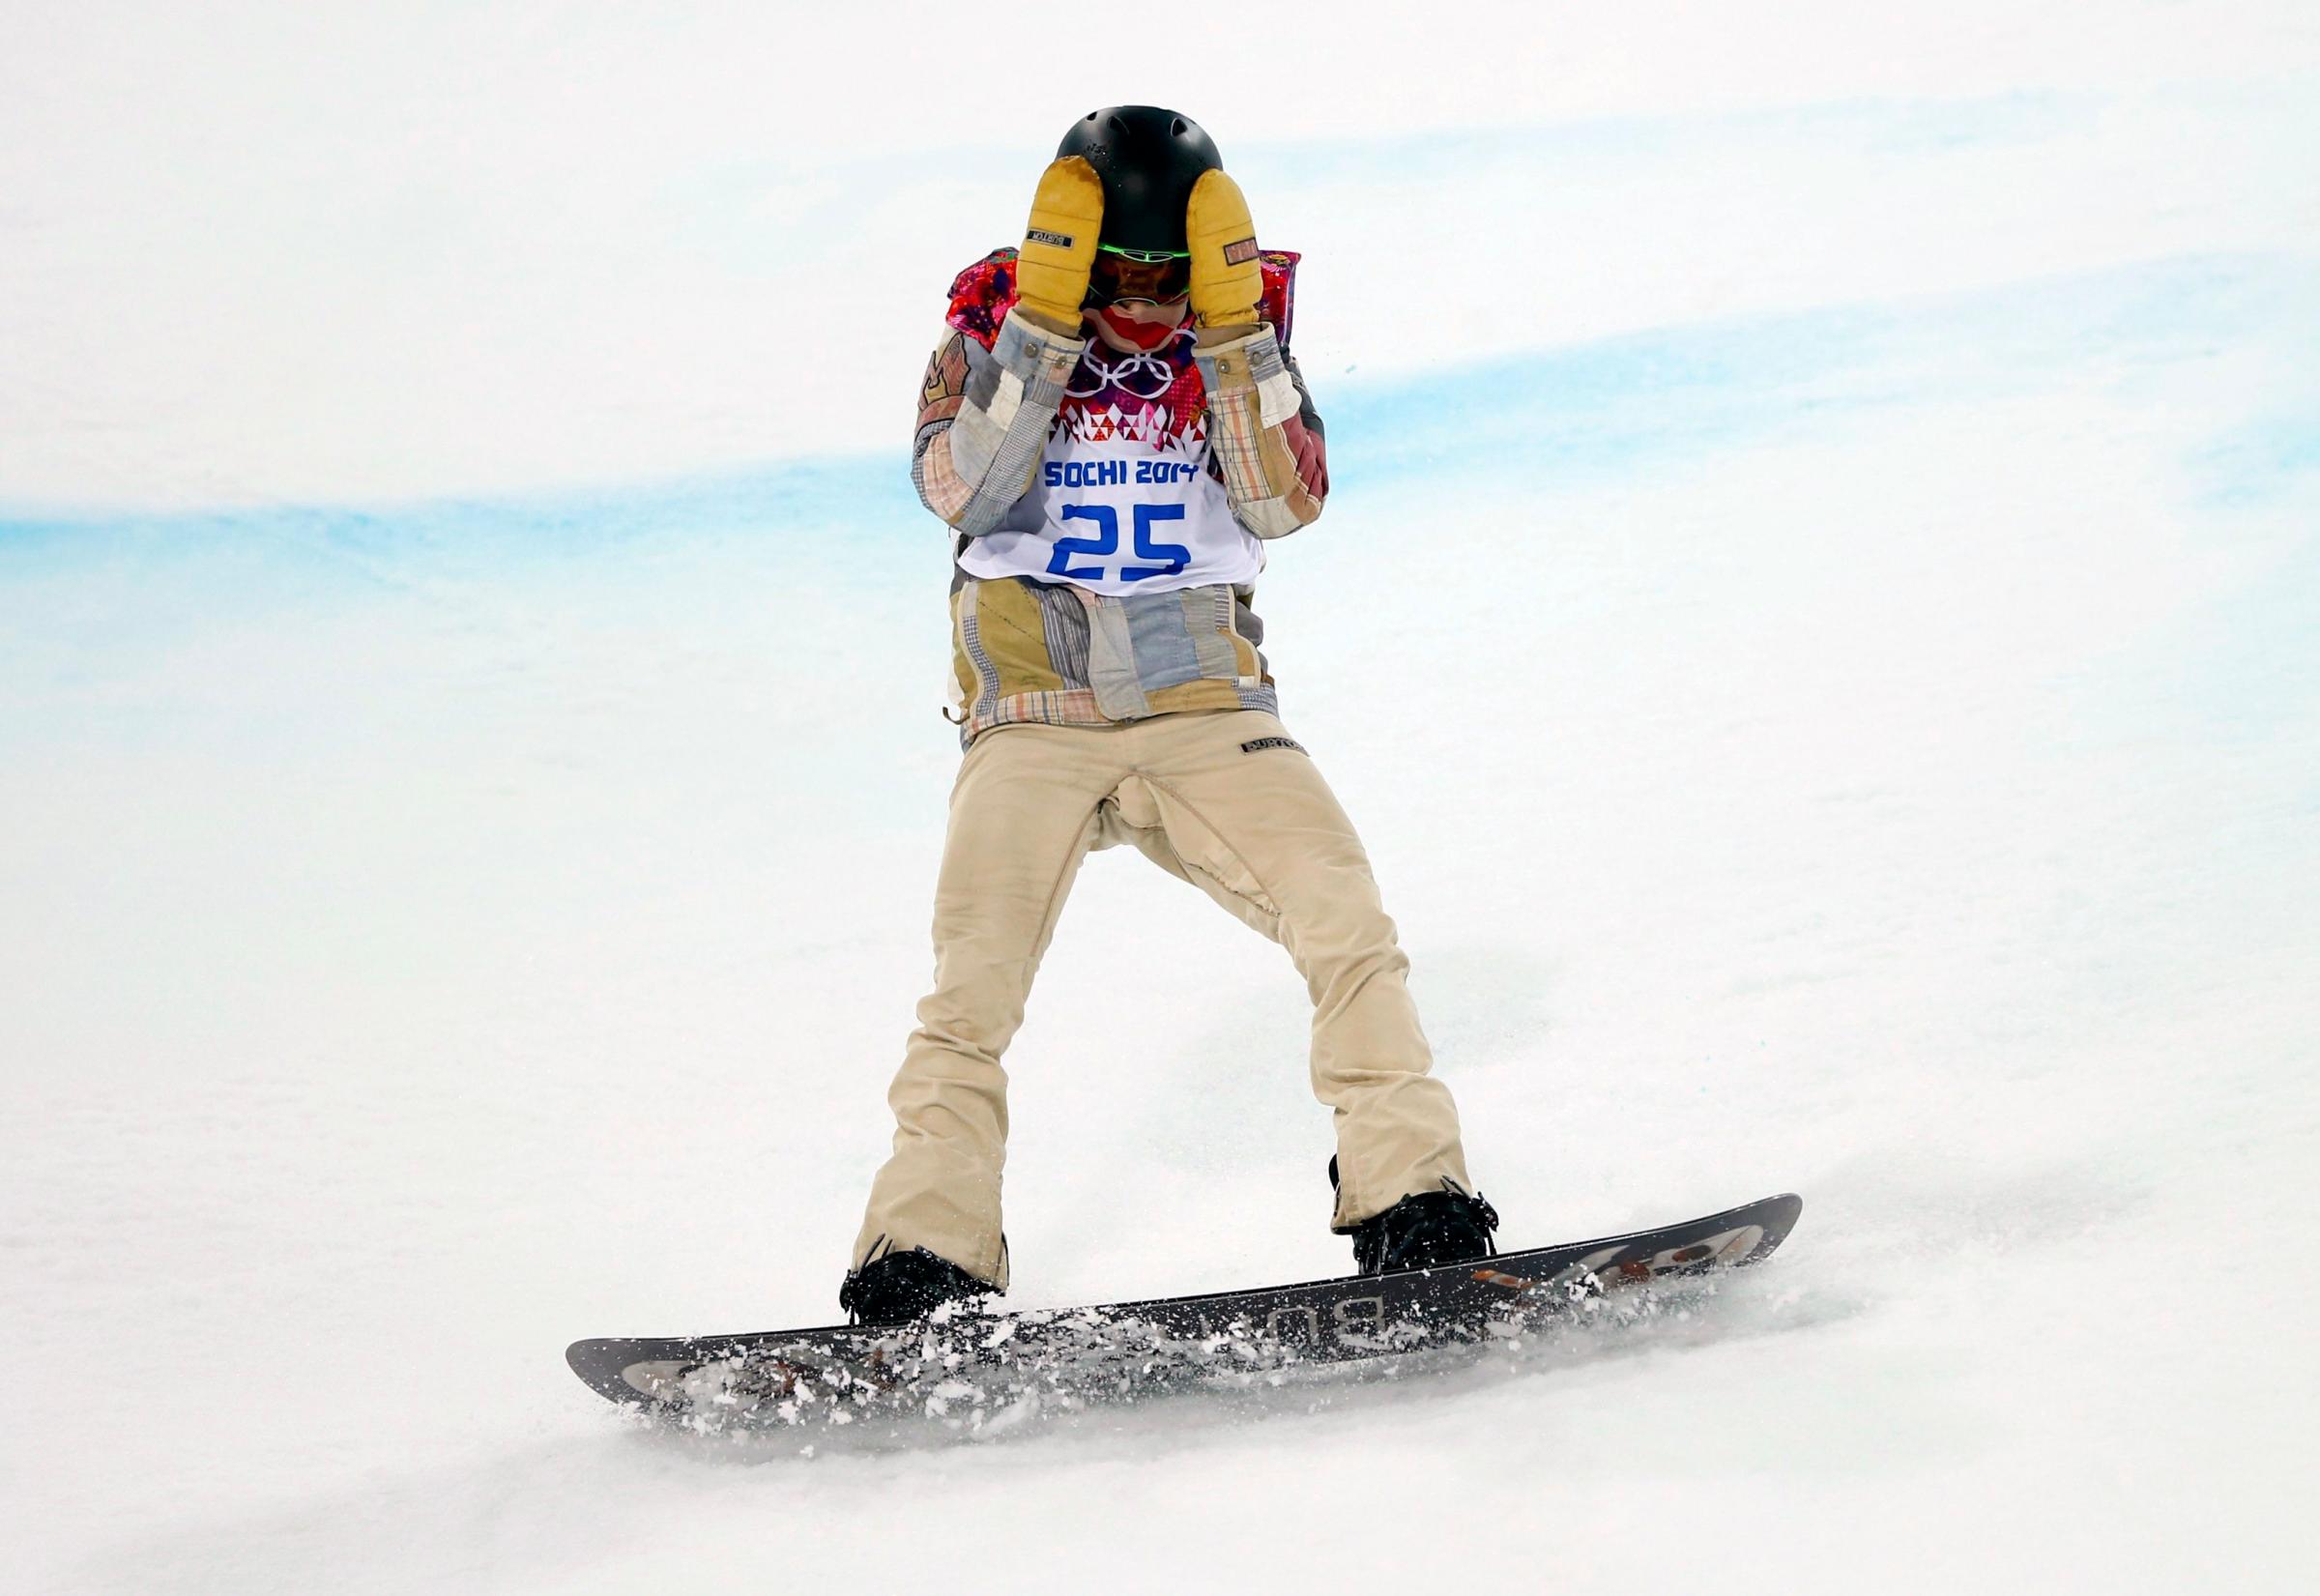 Shaun White of the U.S. reacts after crashing during the men's snowboard halfpipe final event.